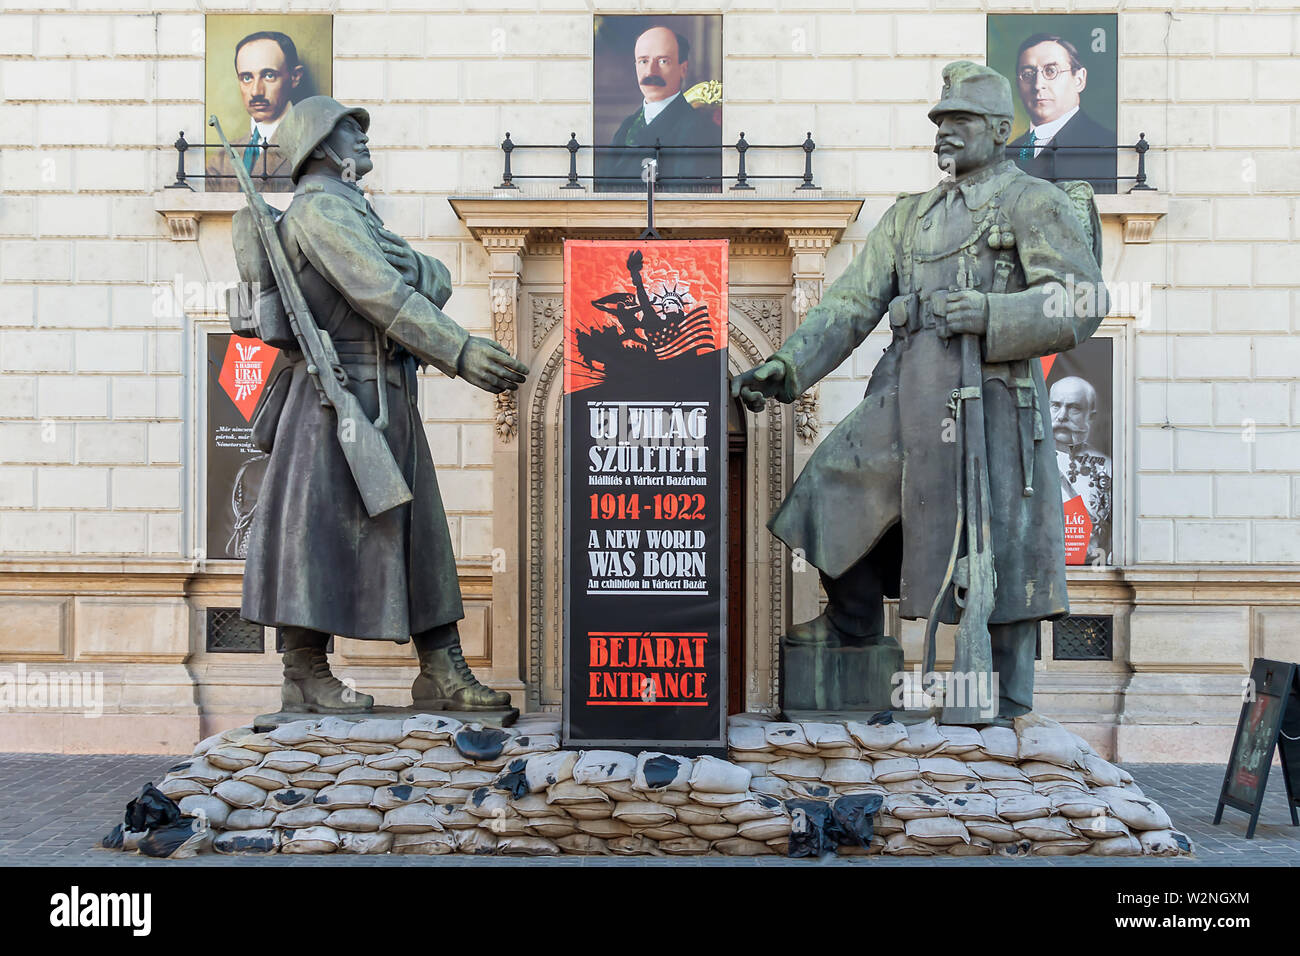 Budapest, Hungary - May 25, 2019 : The Museum of Military History and some of the statues around the building. Located in a former municipal army barr Stock Photo